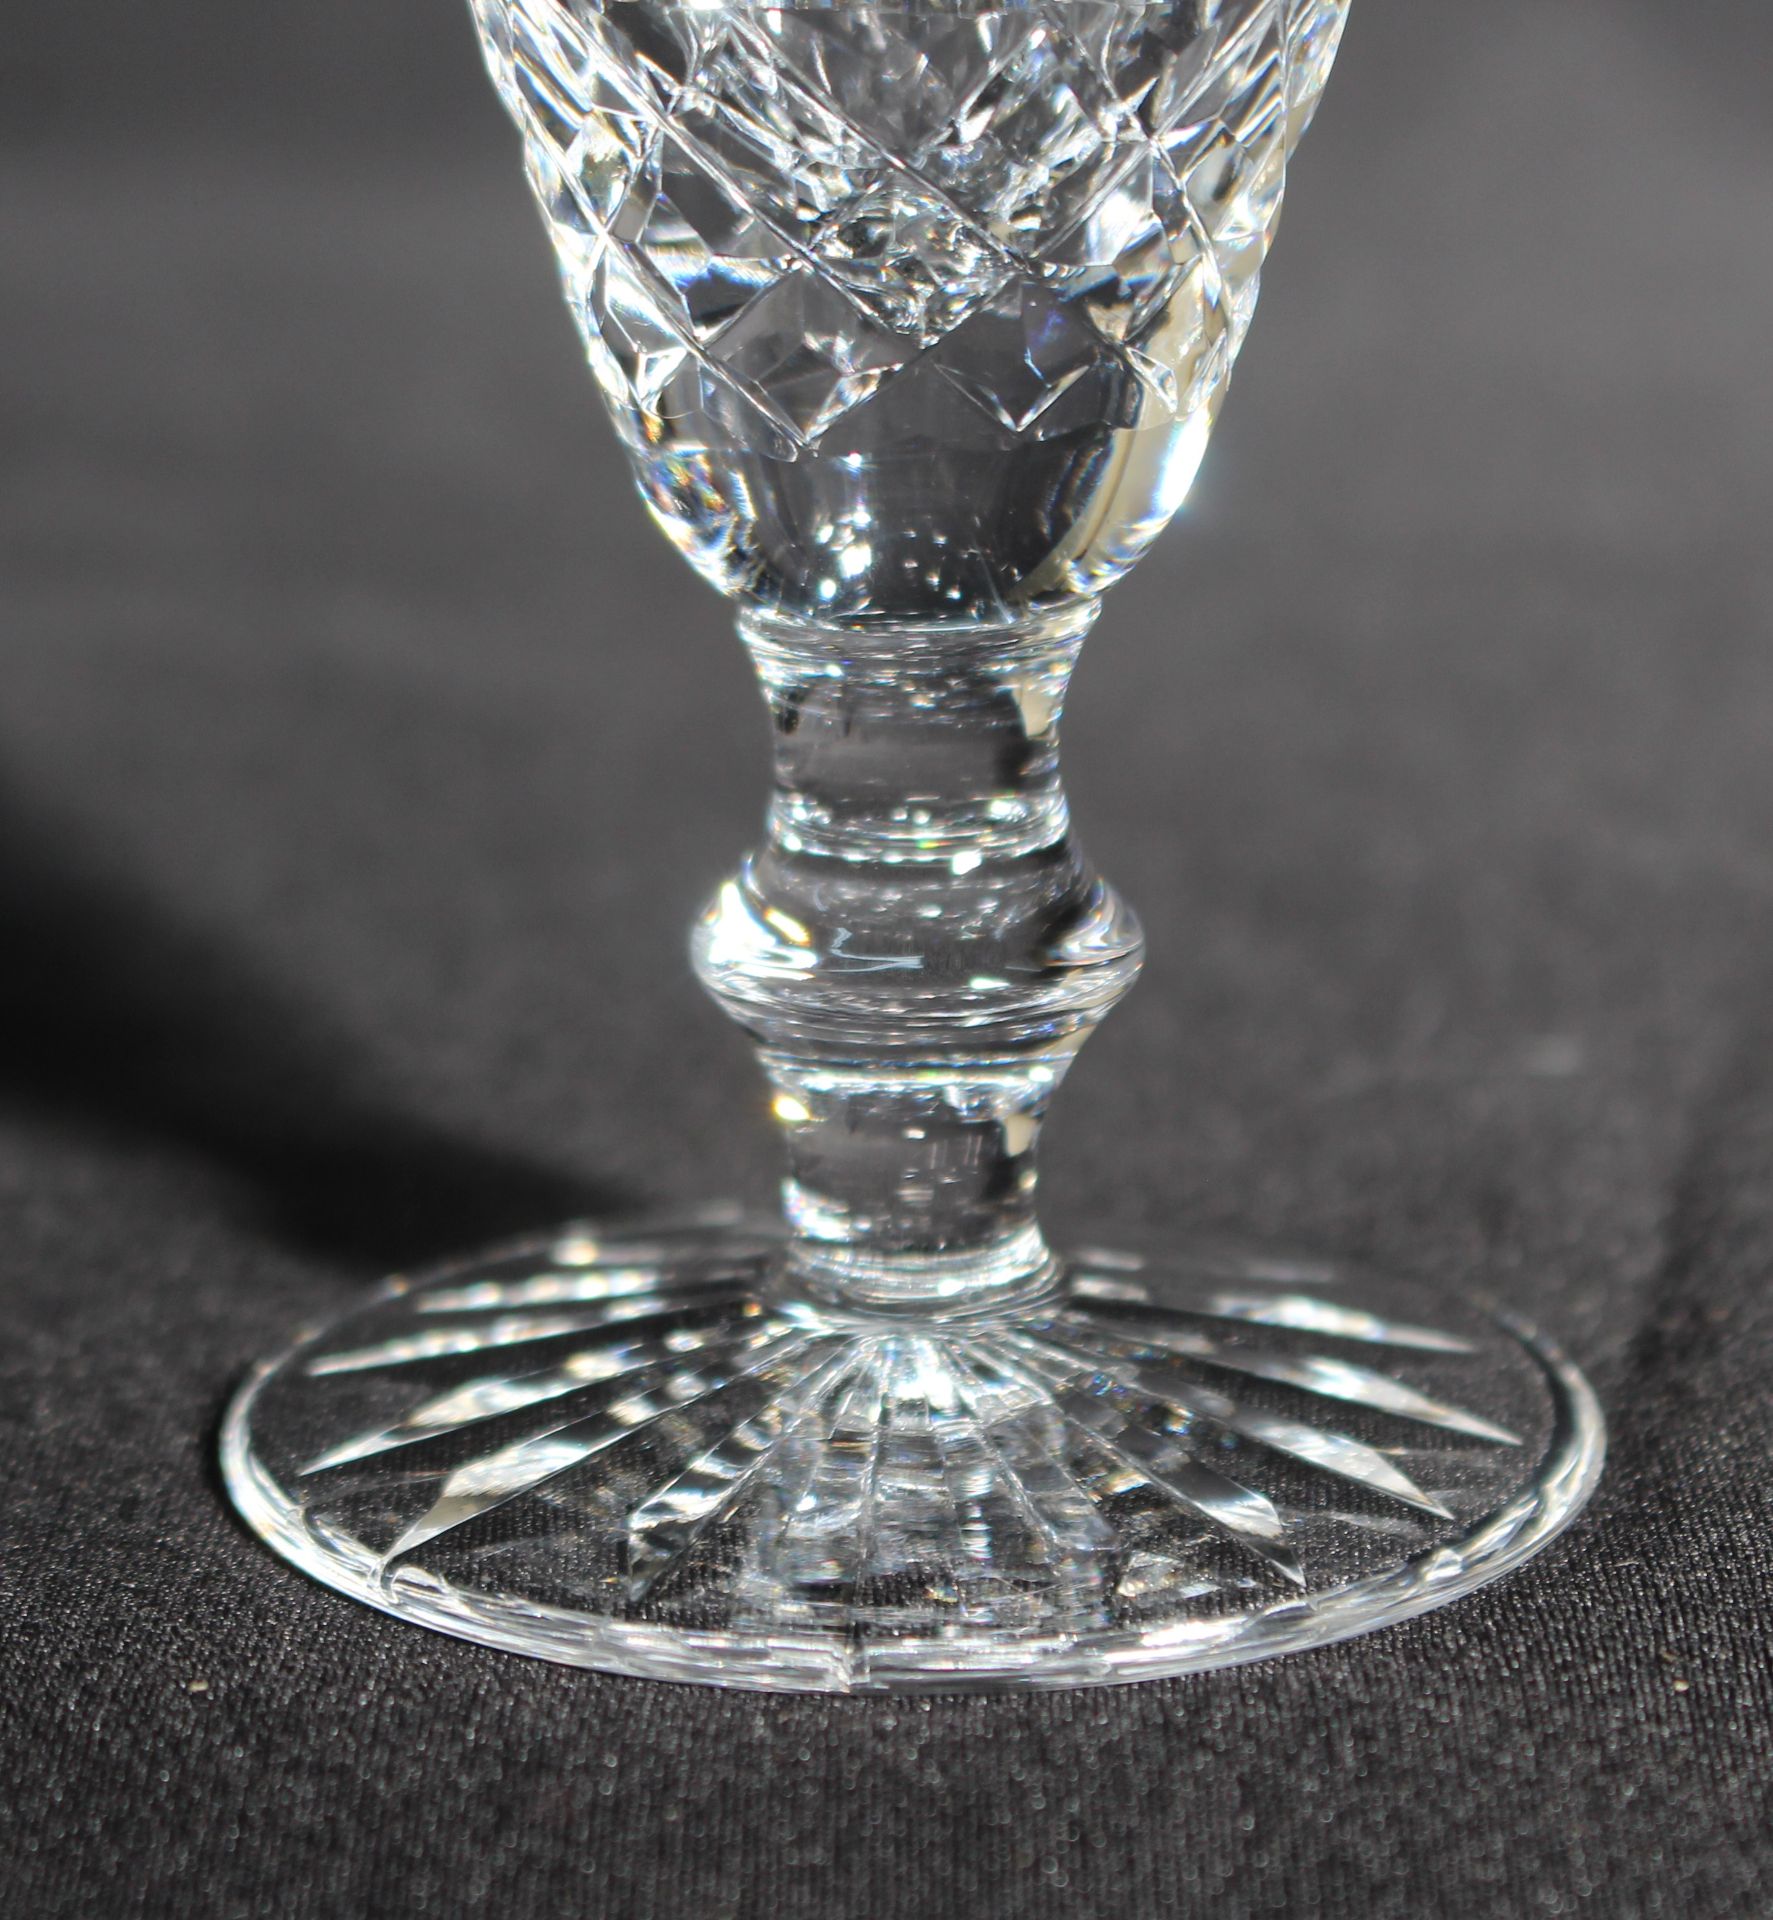 Set of 6 Vintage Waterford Cut Crystal Knopped Sherry Glasses - Image 4 of 6